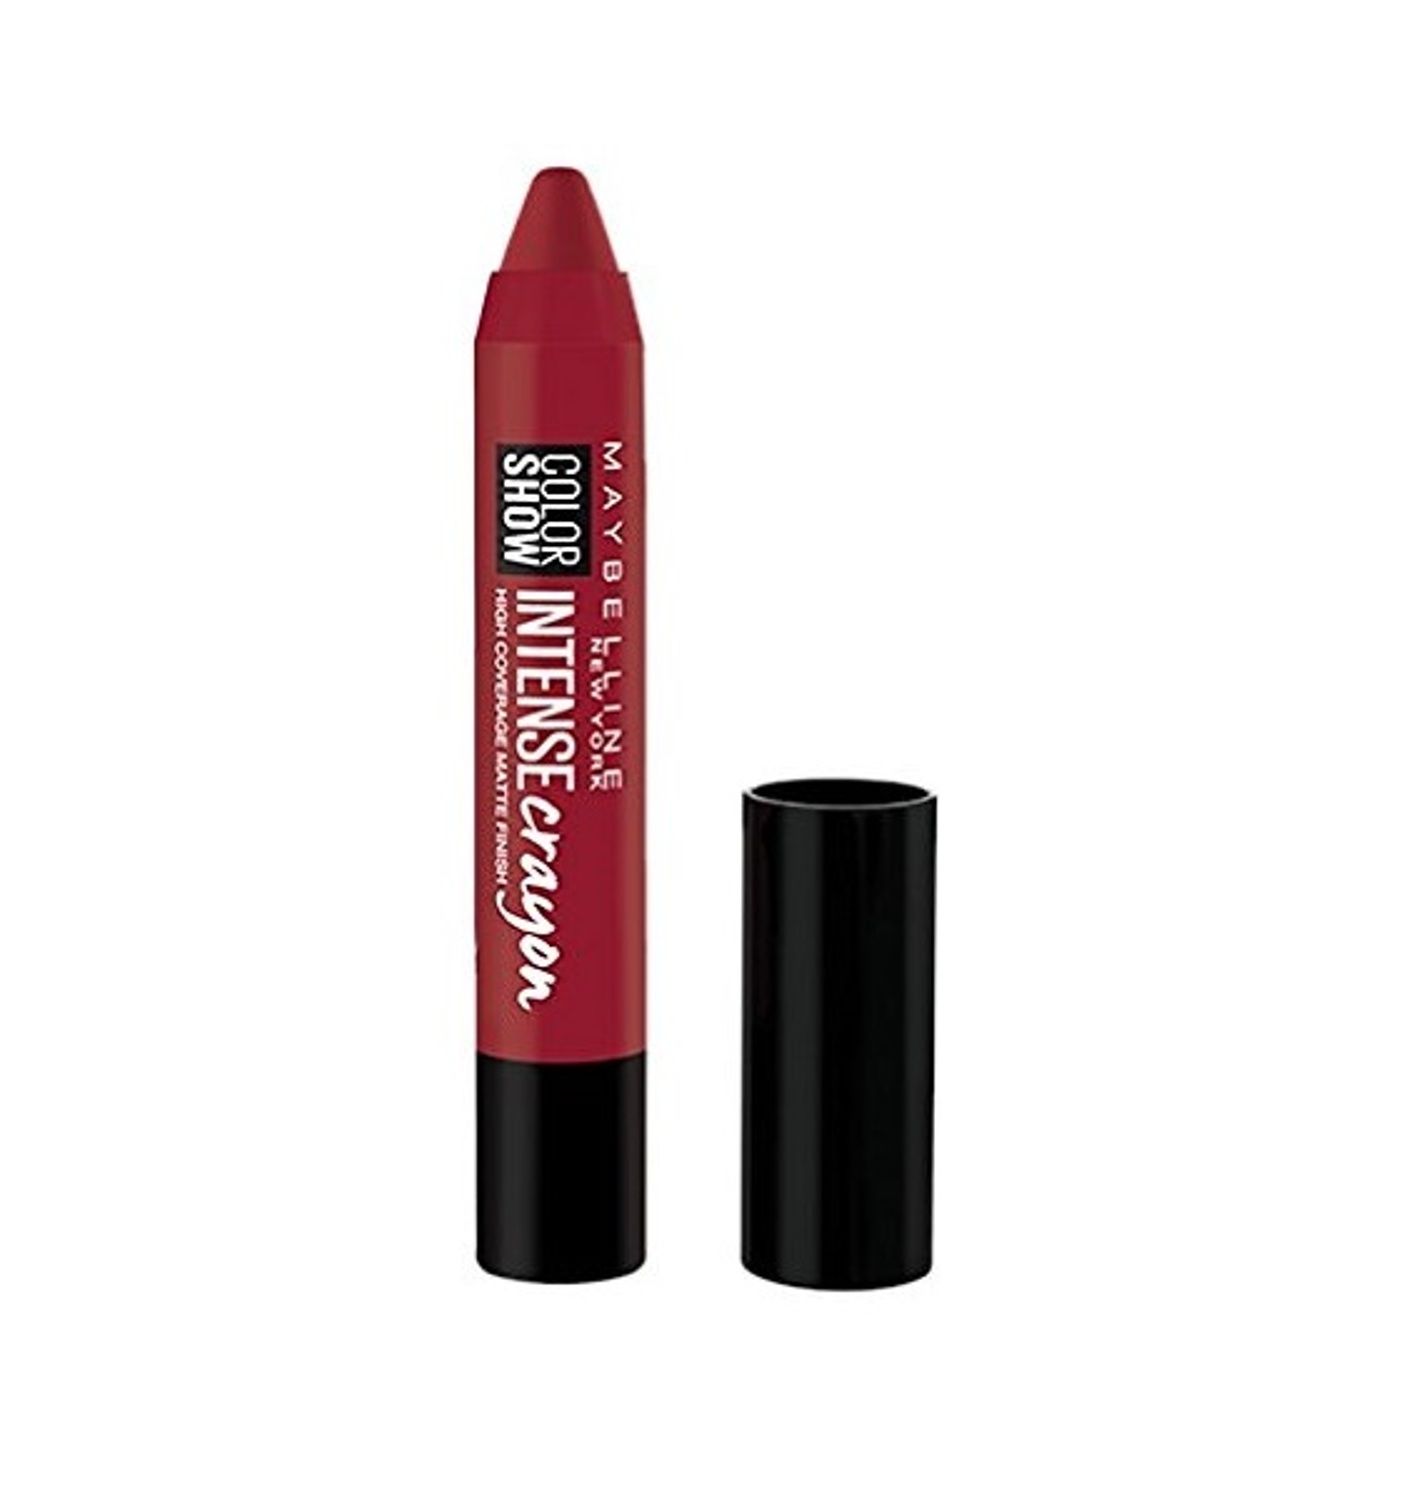 Maybelline Lip Crayon Intense Red Buy Maybelline Lip Crayon Intense 7658